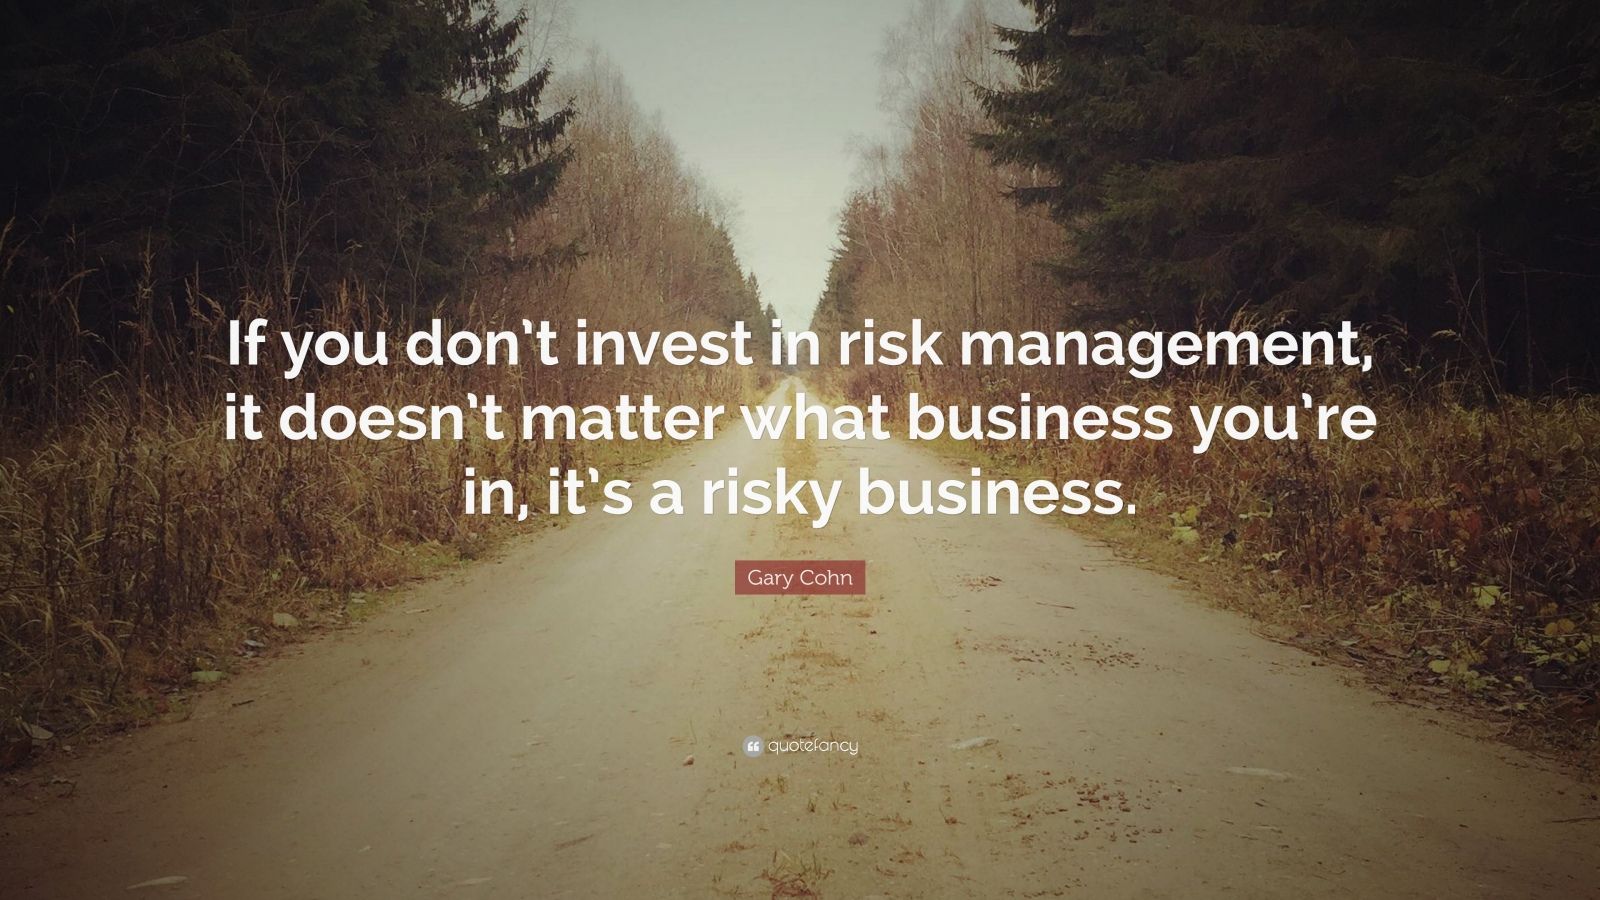 Gary Cohn Quote: “If you don’t invest in risk management, it doesn’t